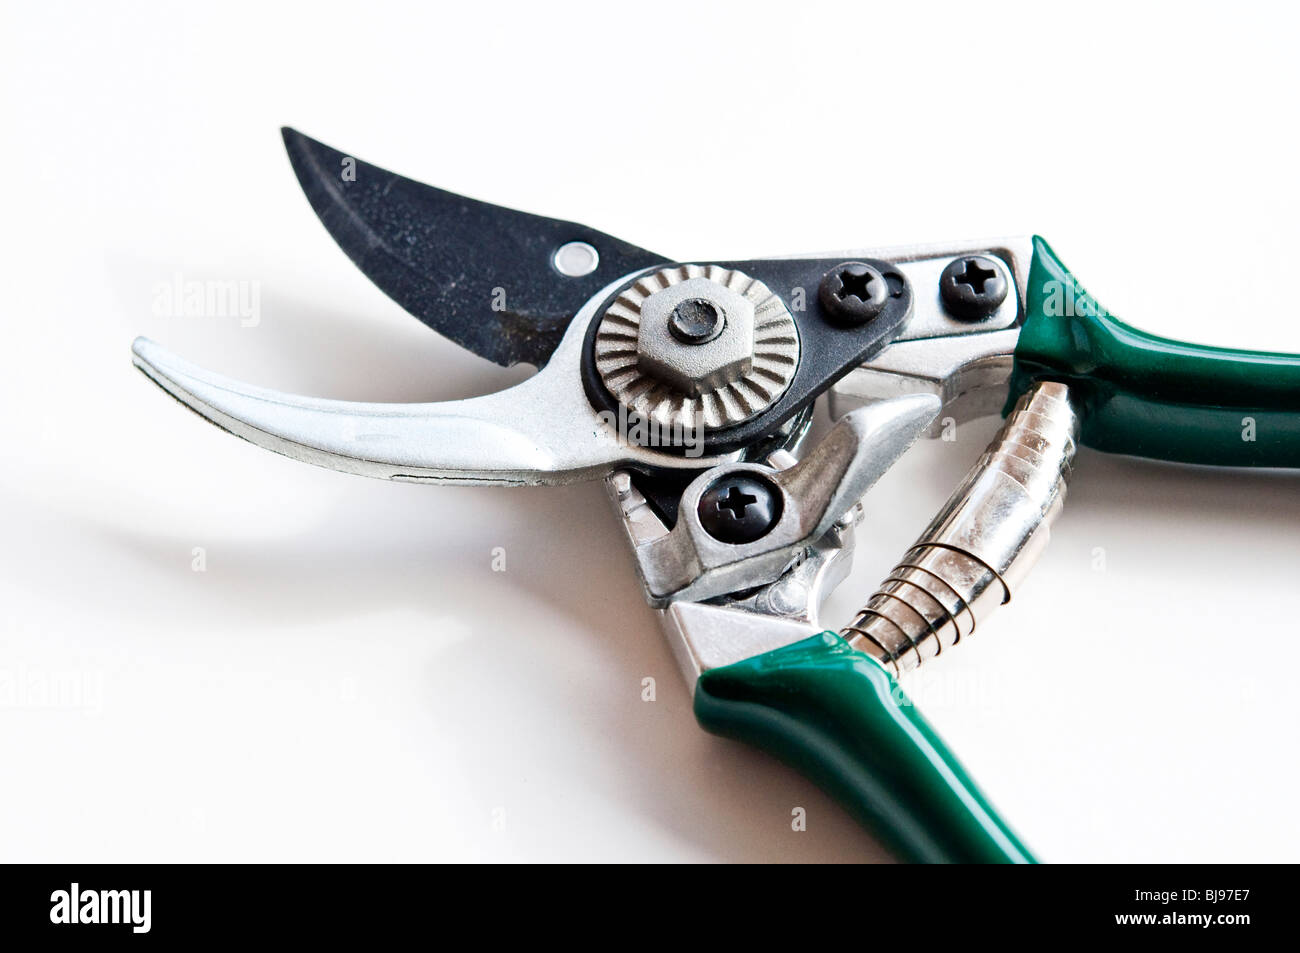 Garden secateurs, used for pruning.  Close up view on a white background. Stock Photo